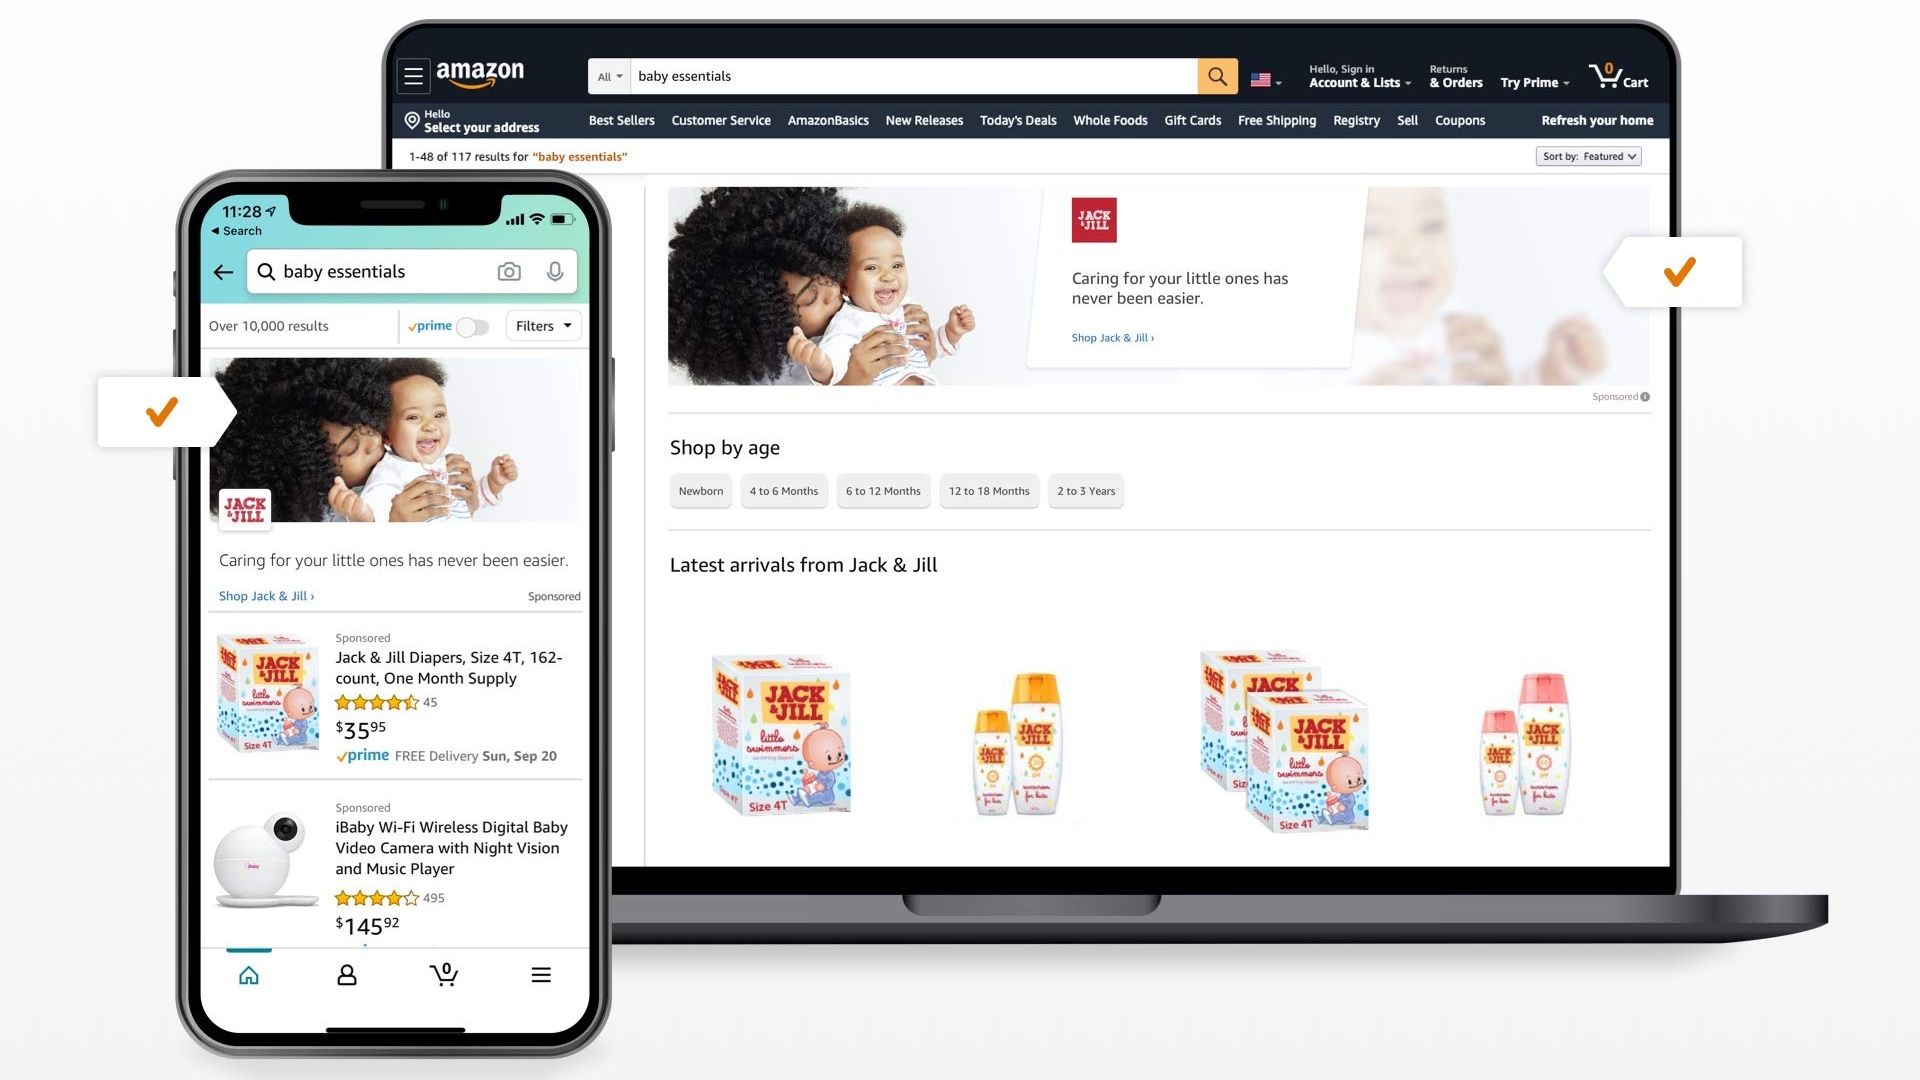 Amazon launches Sponsored Ads and Stores in Brazil